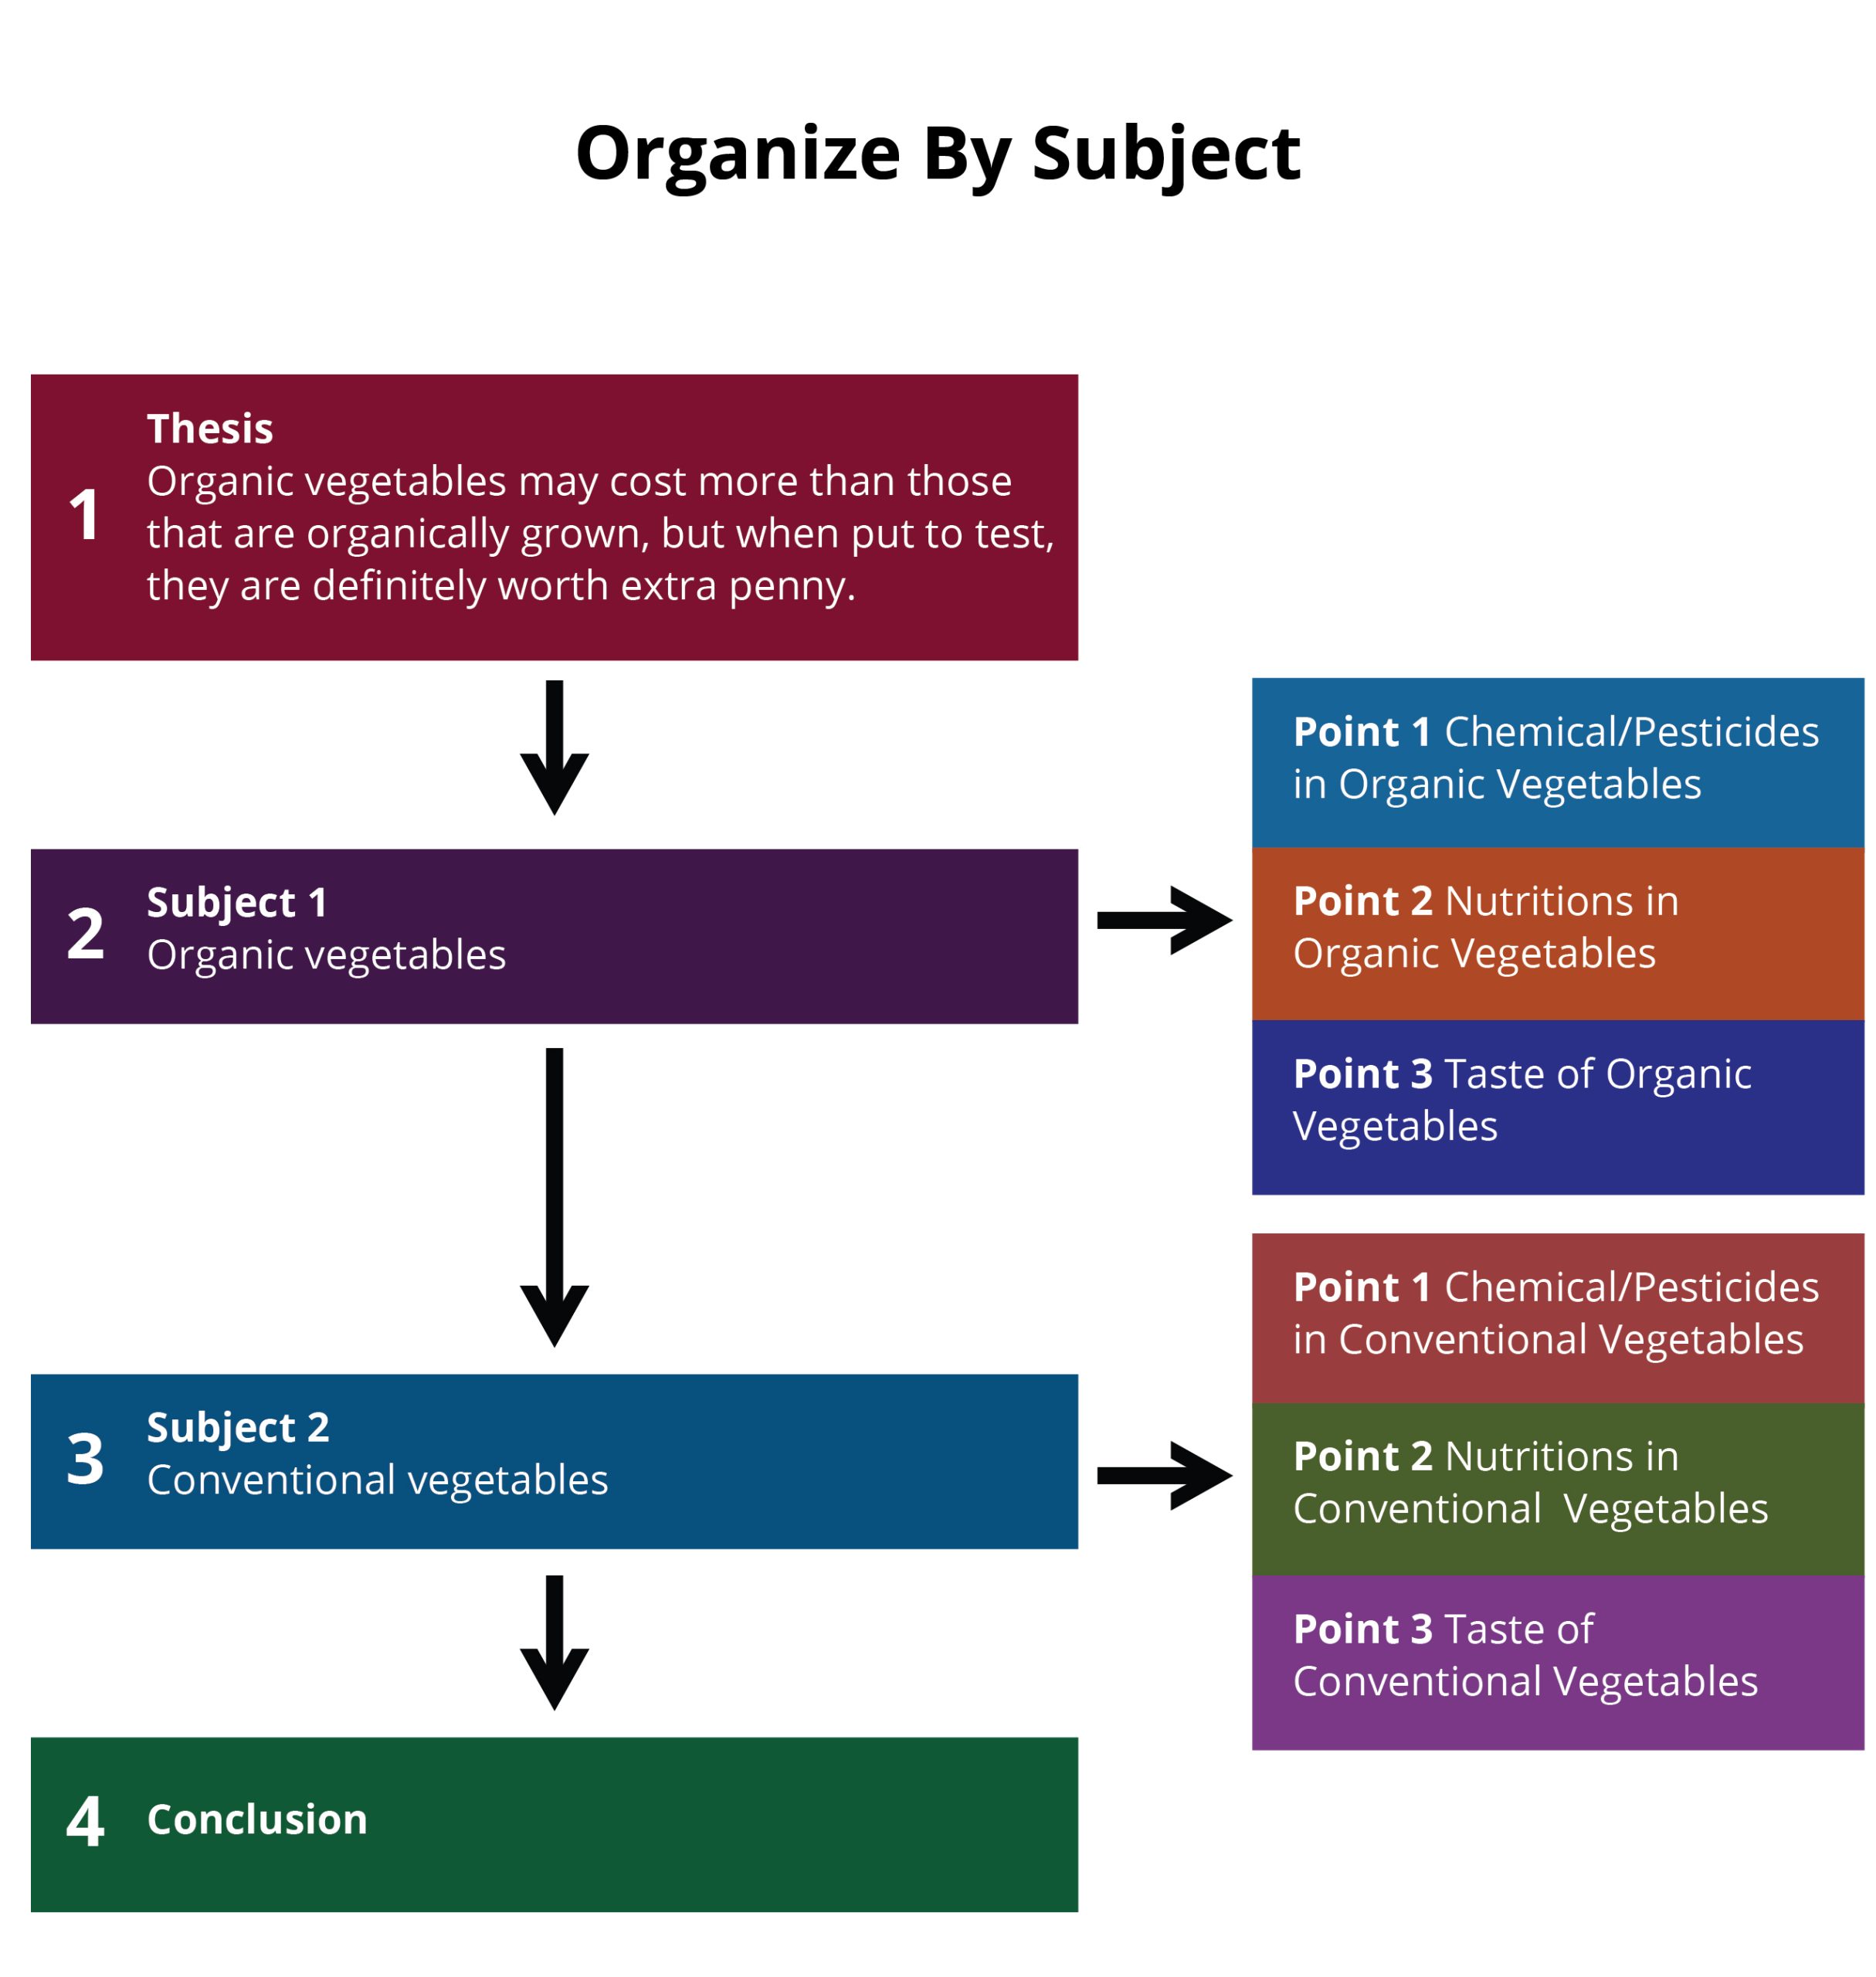 compare and contrast organizational diagram - by subject